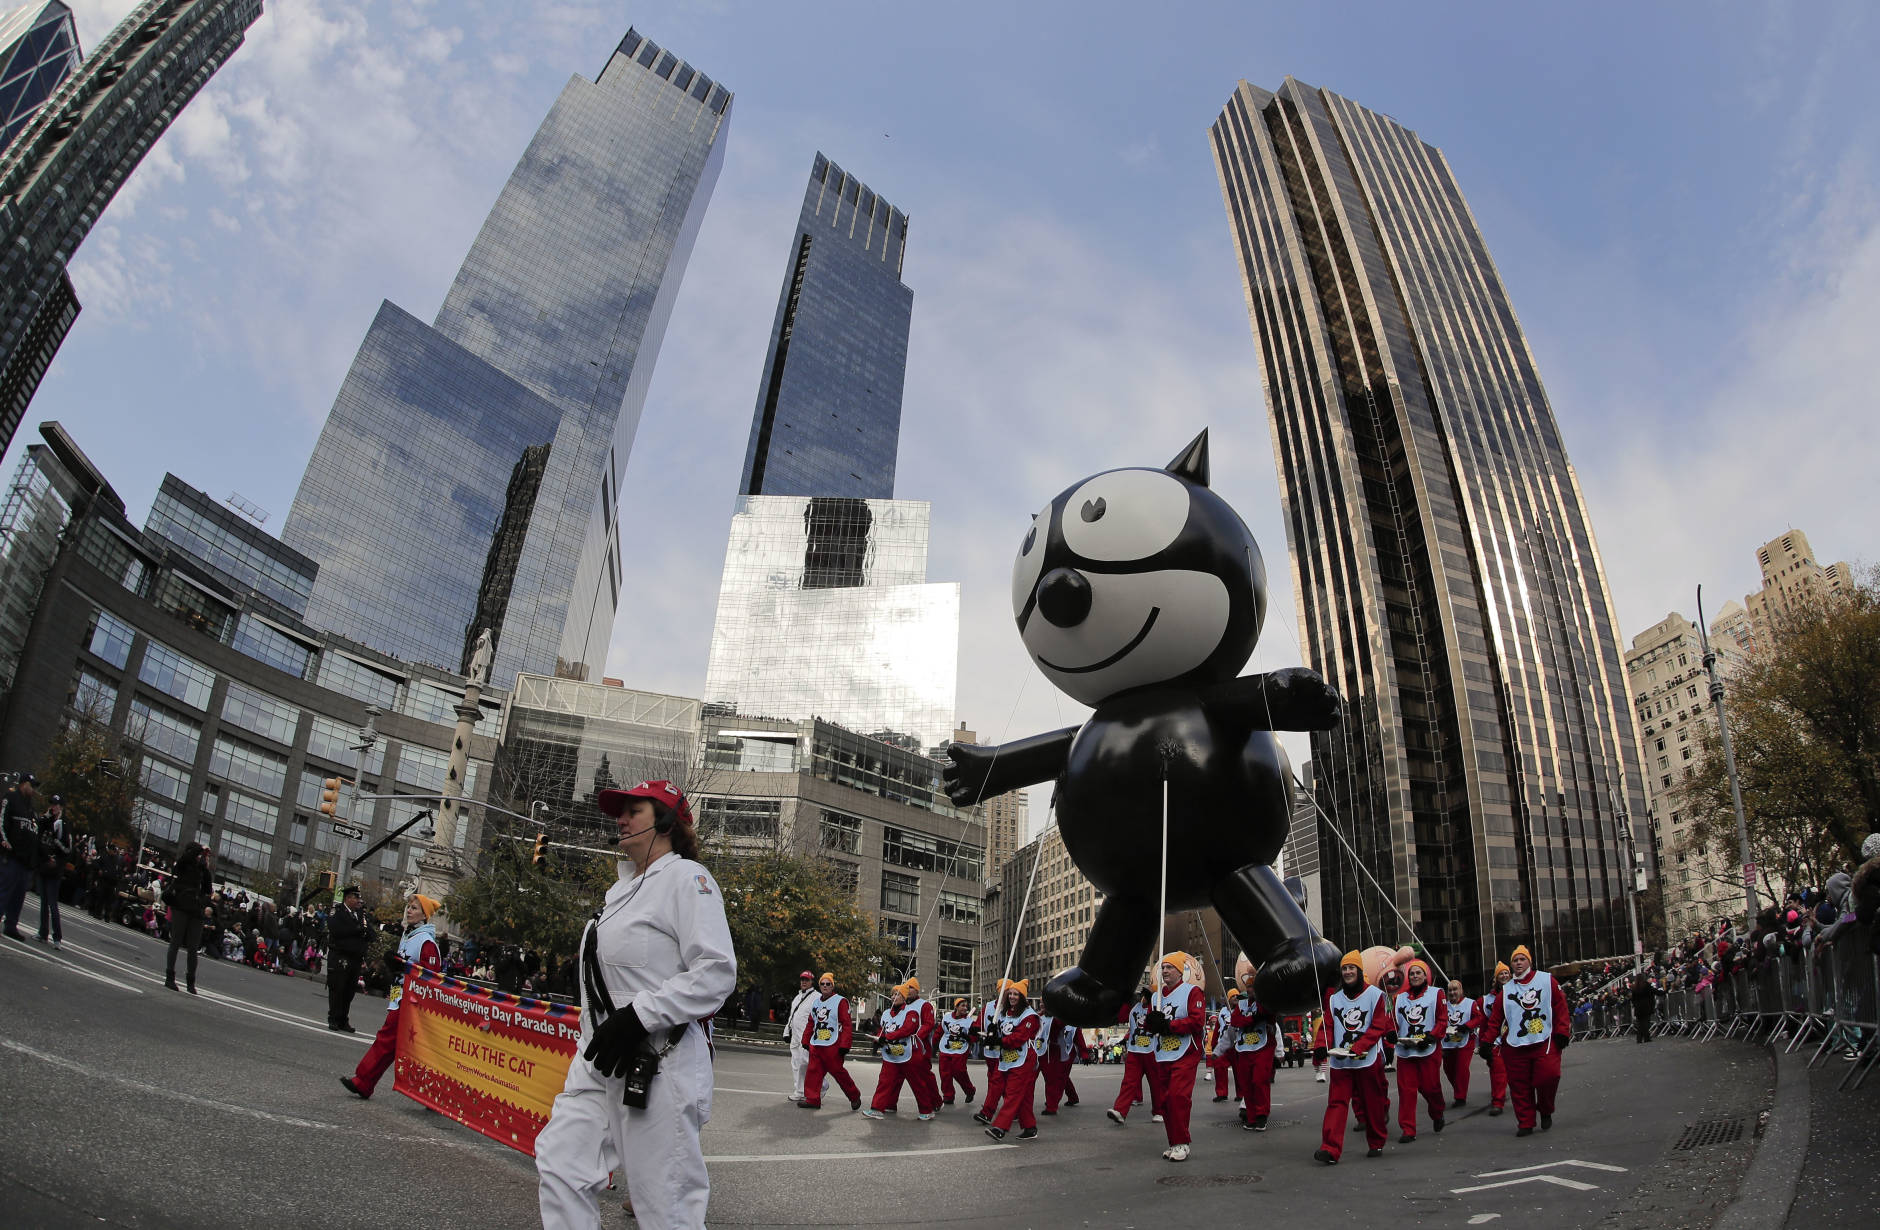 The Felix the Cat balloon is guided through Columbus Circle during the Macy's Thanksgiving Day parade, Thursday, Nov. 24, 2016, in New York. The balloon was one of the original balloons to appear in the first Macy's Parade. (AP Photo/Julie Jacobson)